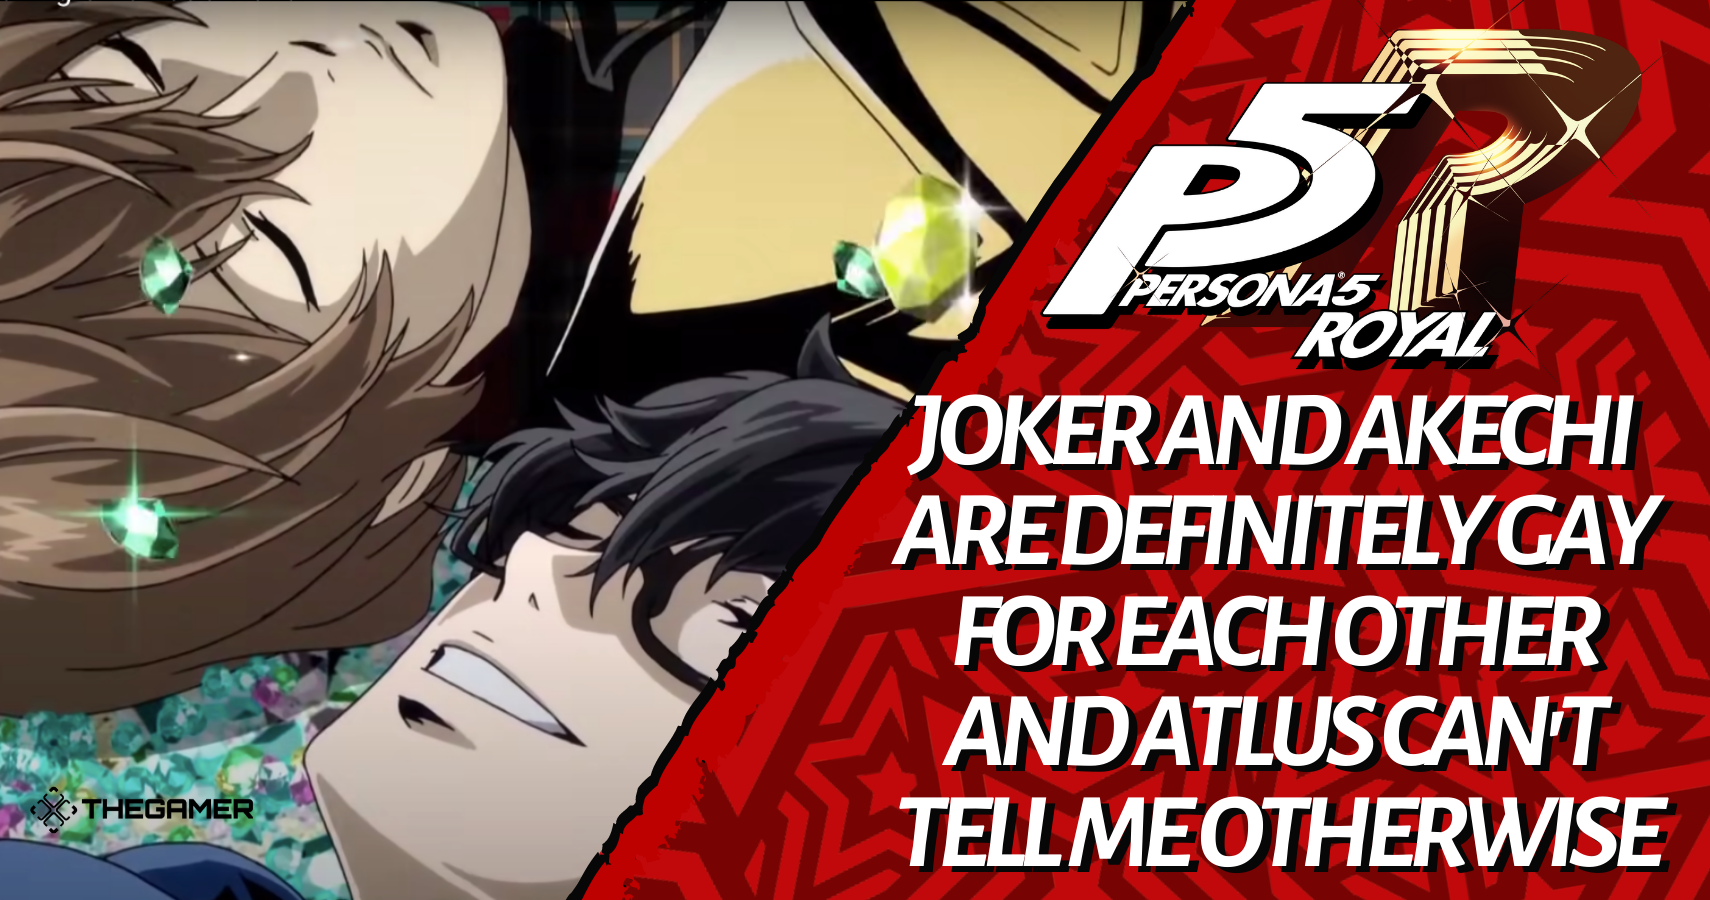 Persona 5 Royal Joker And Akechi Are Definitely Gay For Each Other